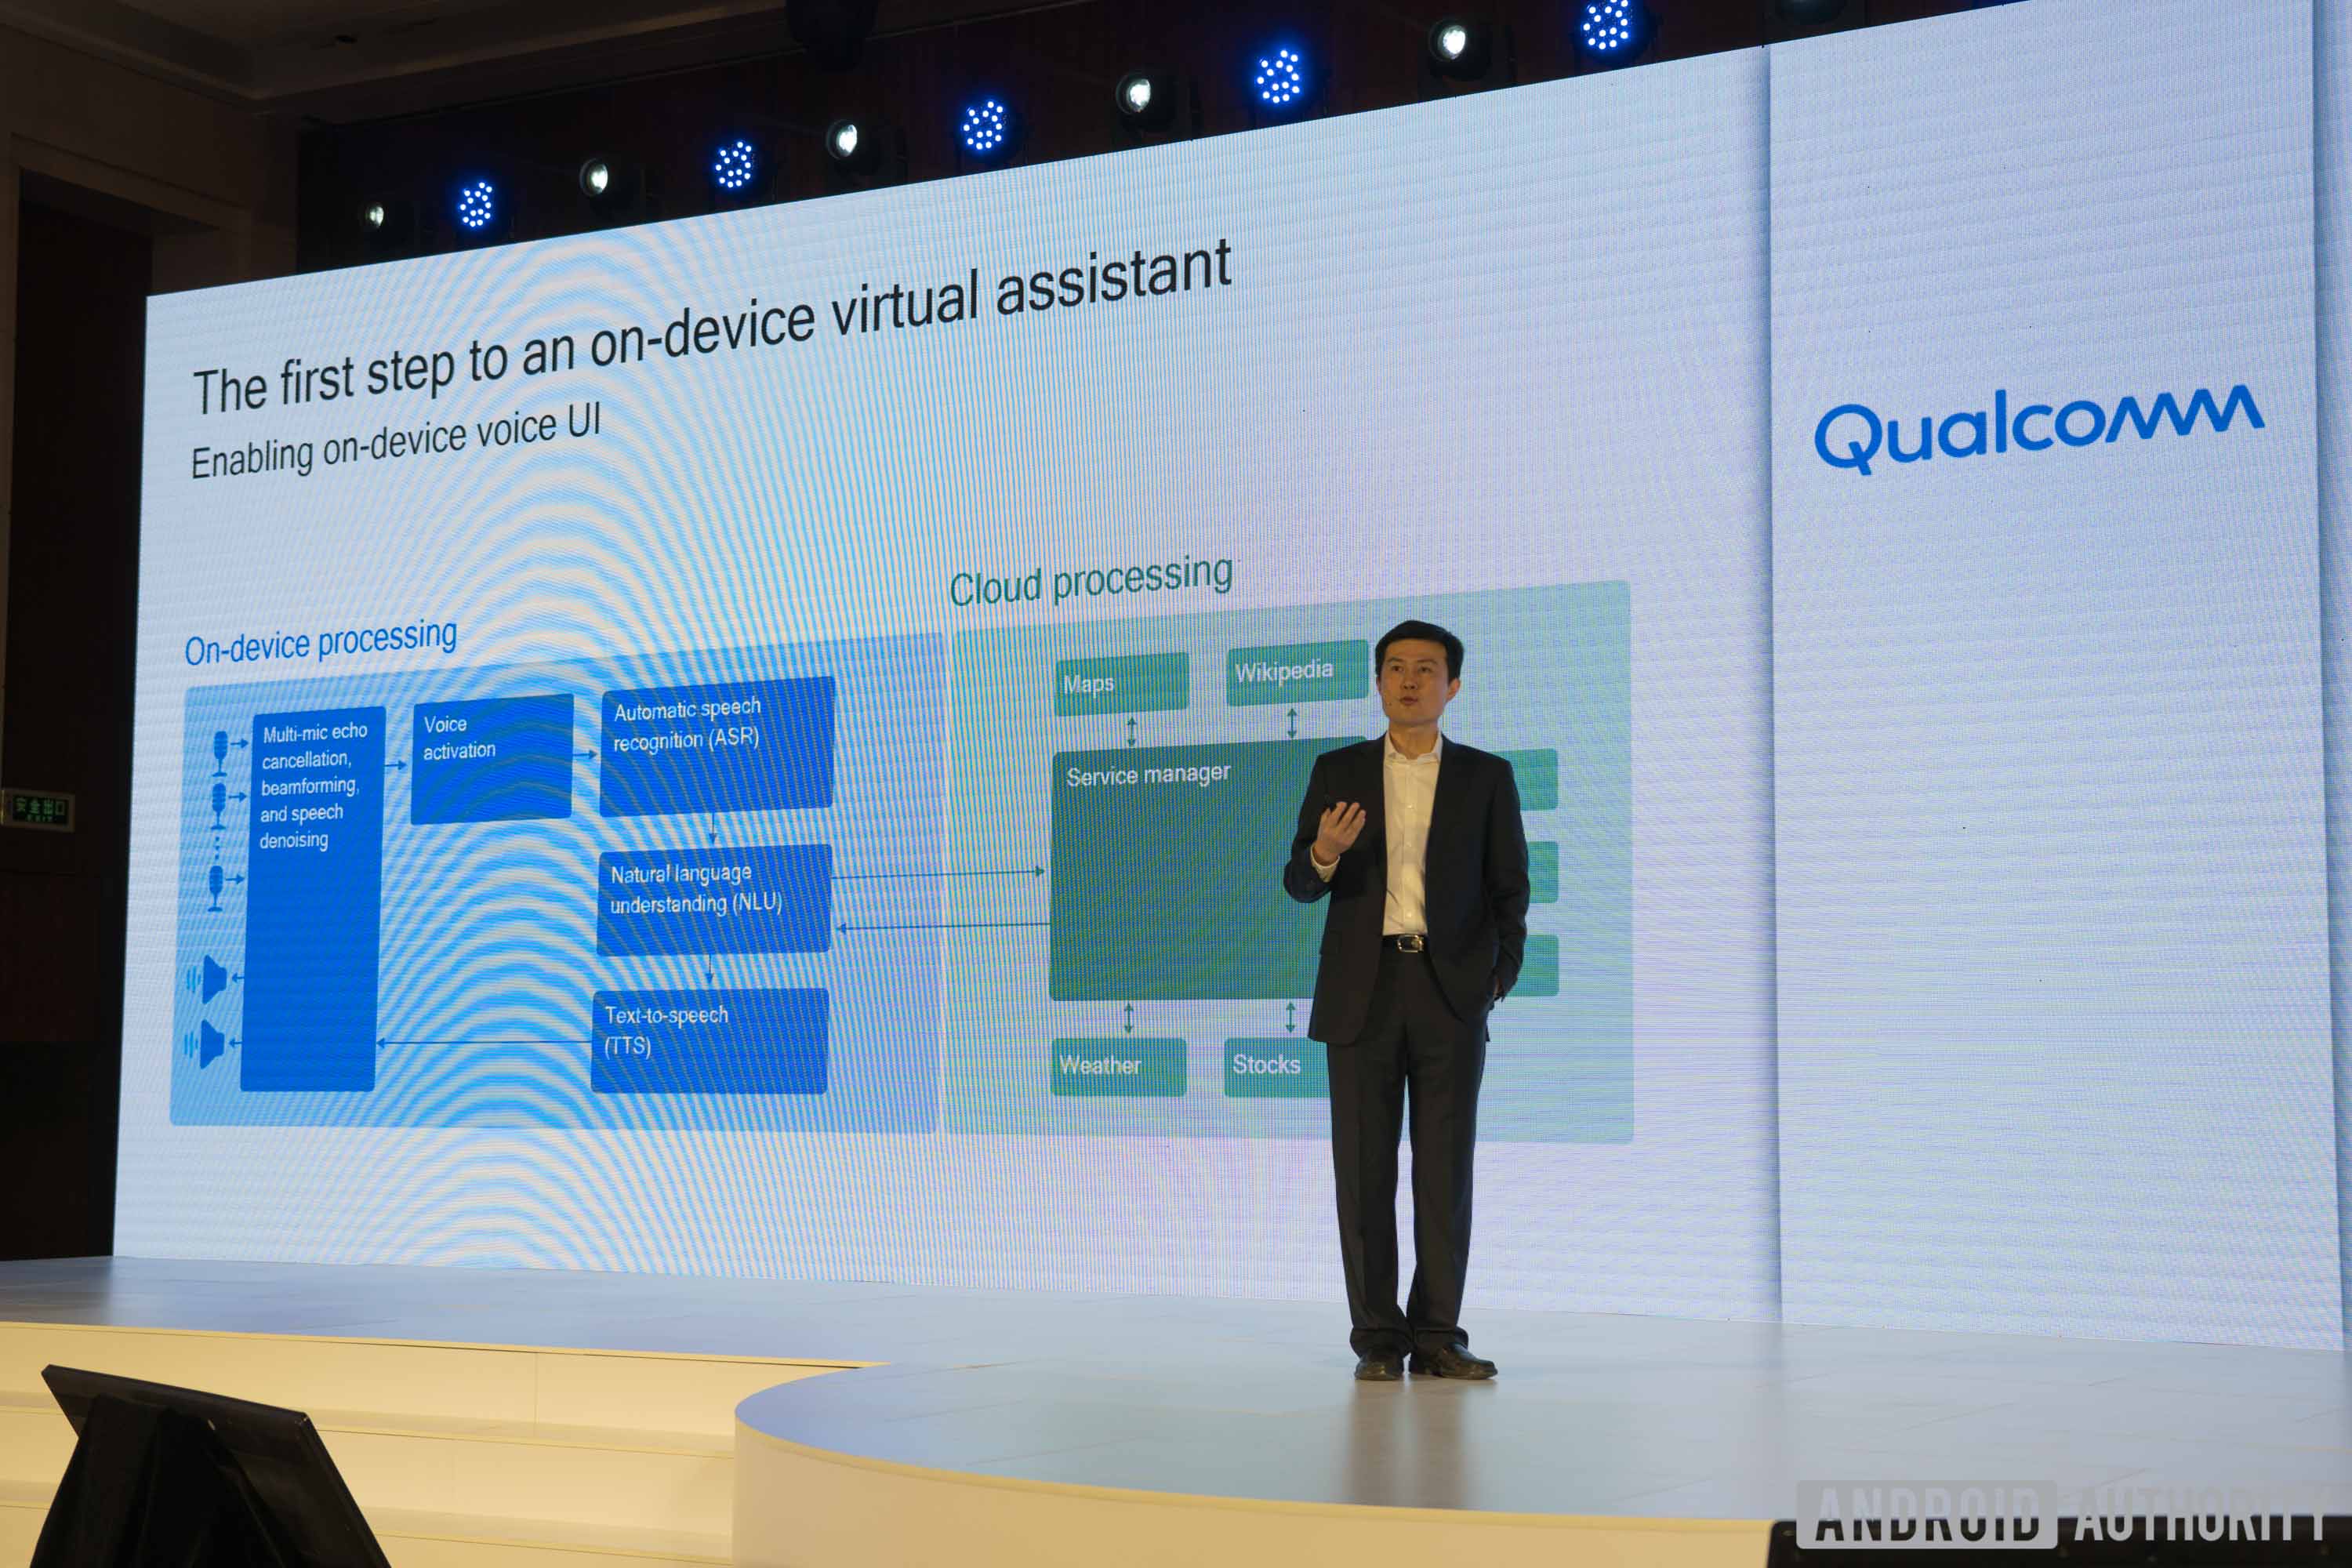 Qualcomm Senior Director of Engineering Jilei Hou floats the idea of a mostly on-device virtual assistant